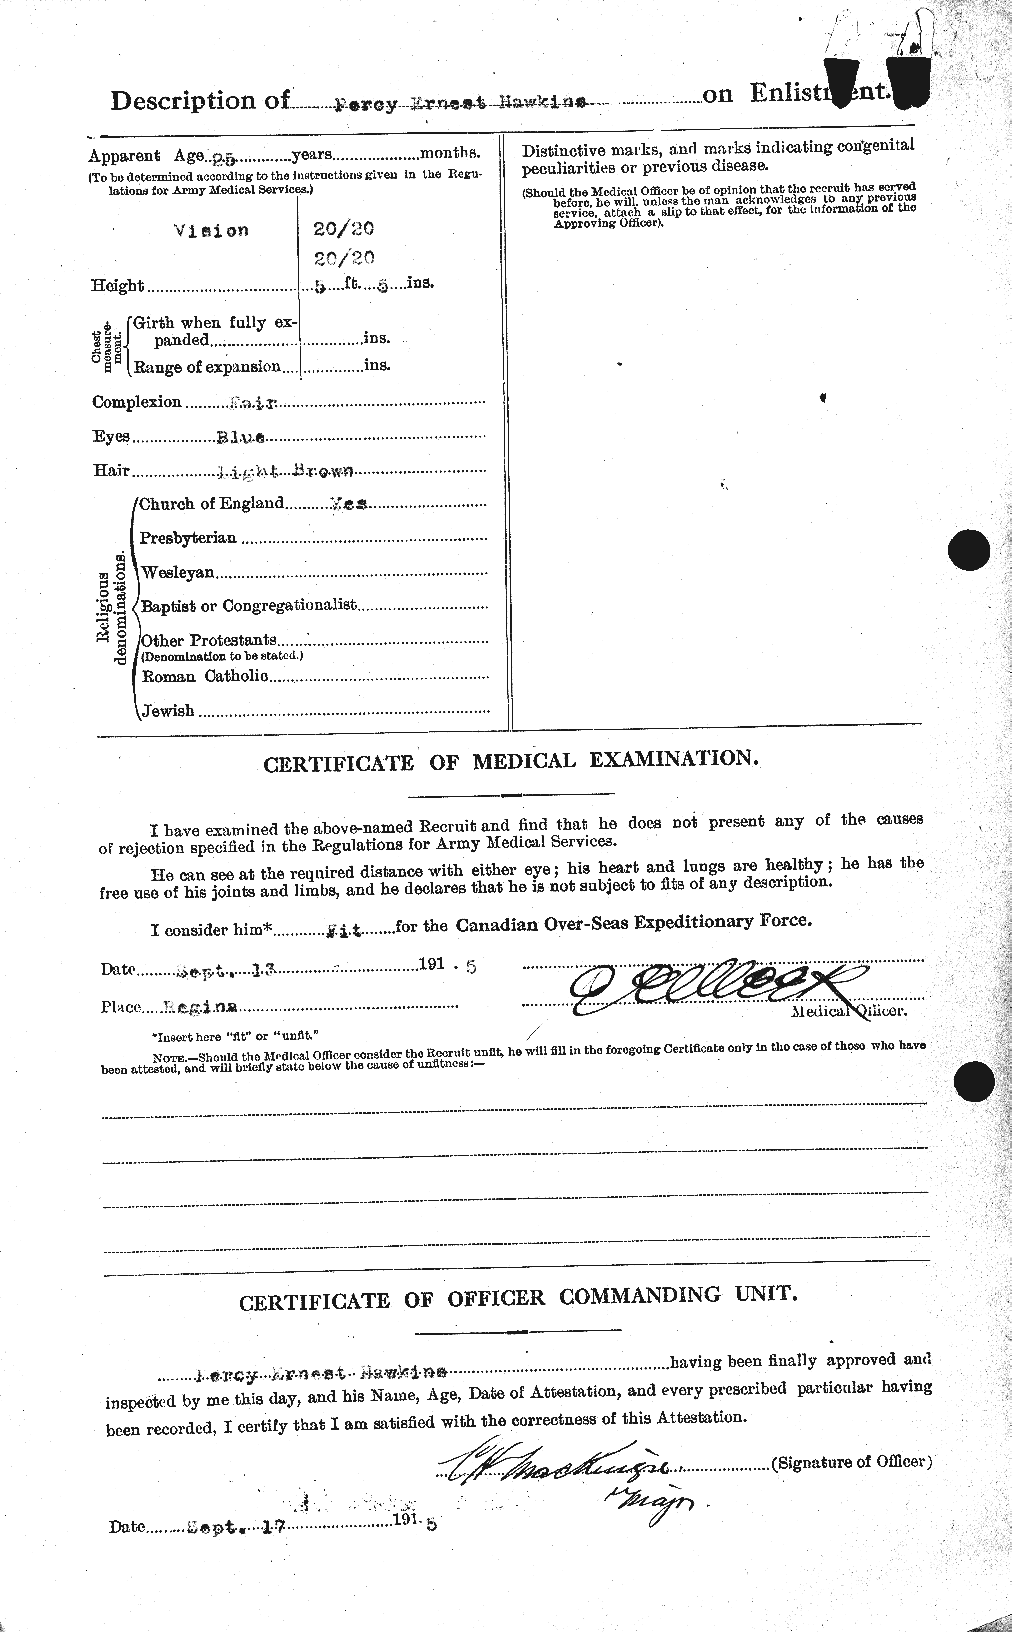 Personnel Records of the First World War - CEF 387216b